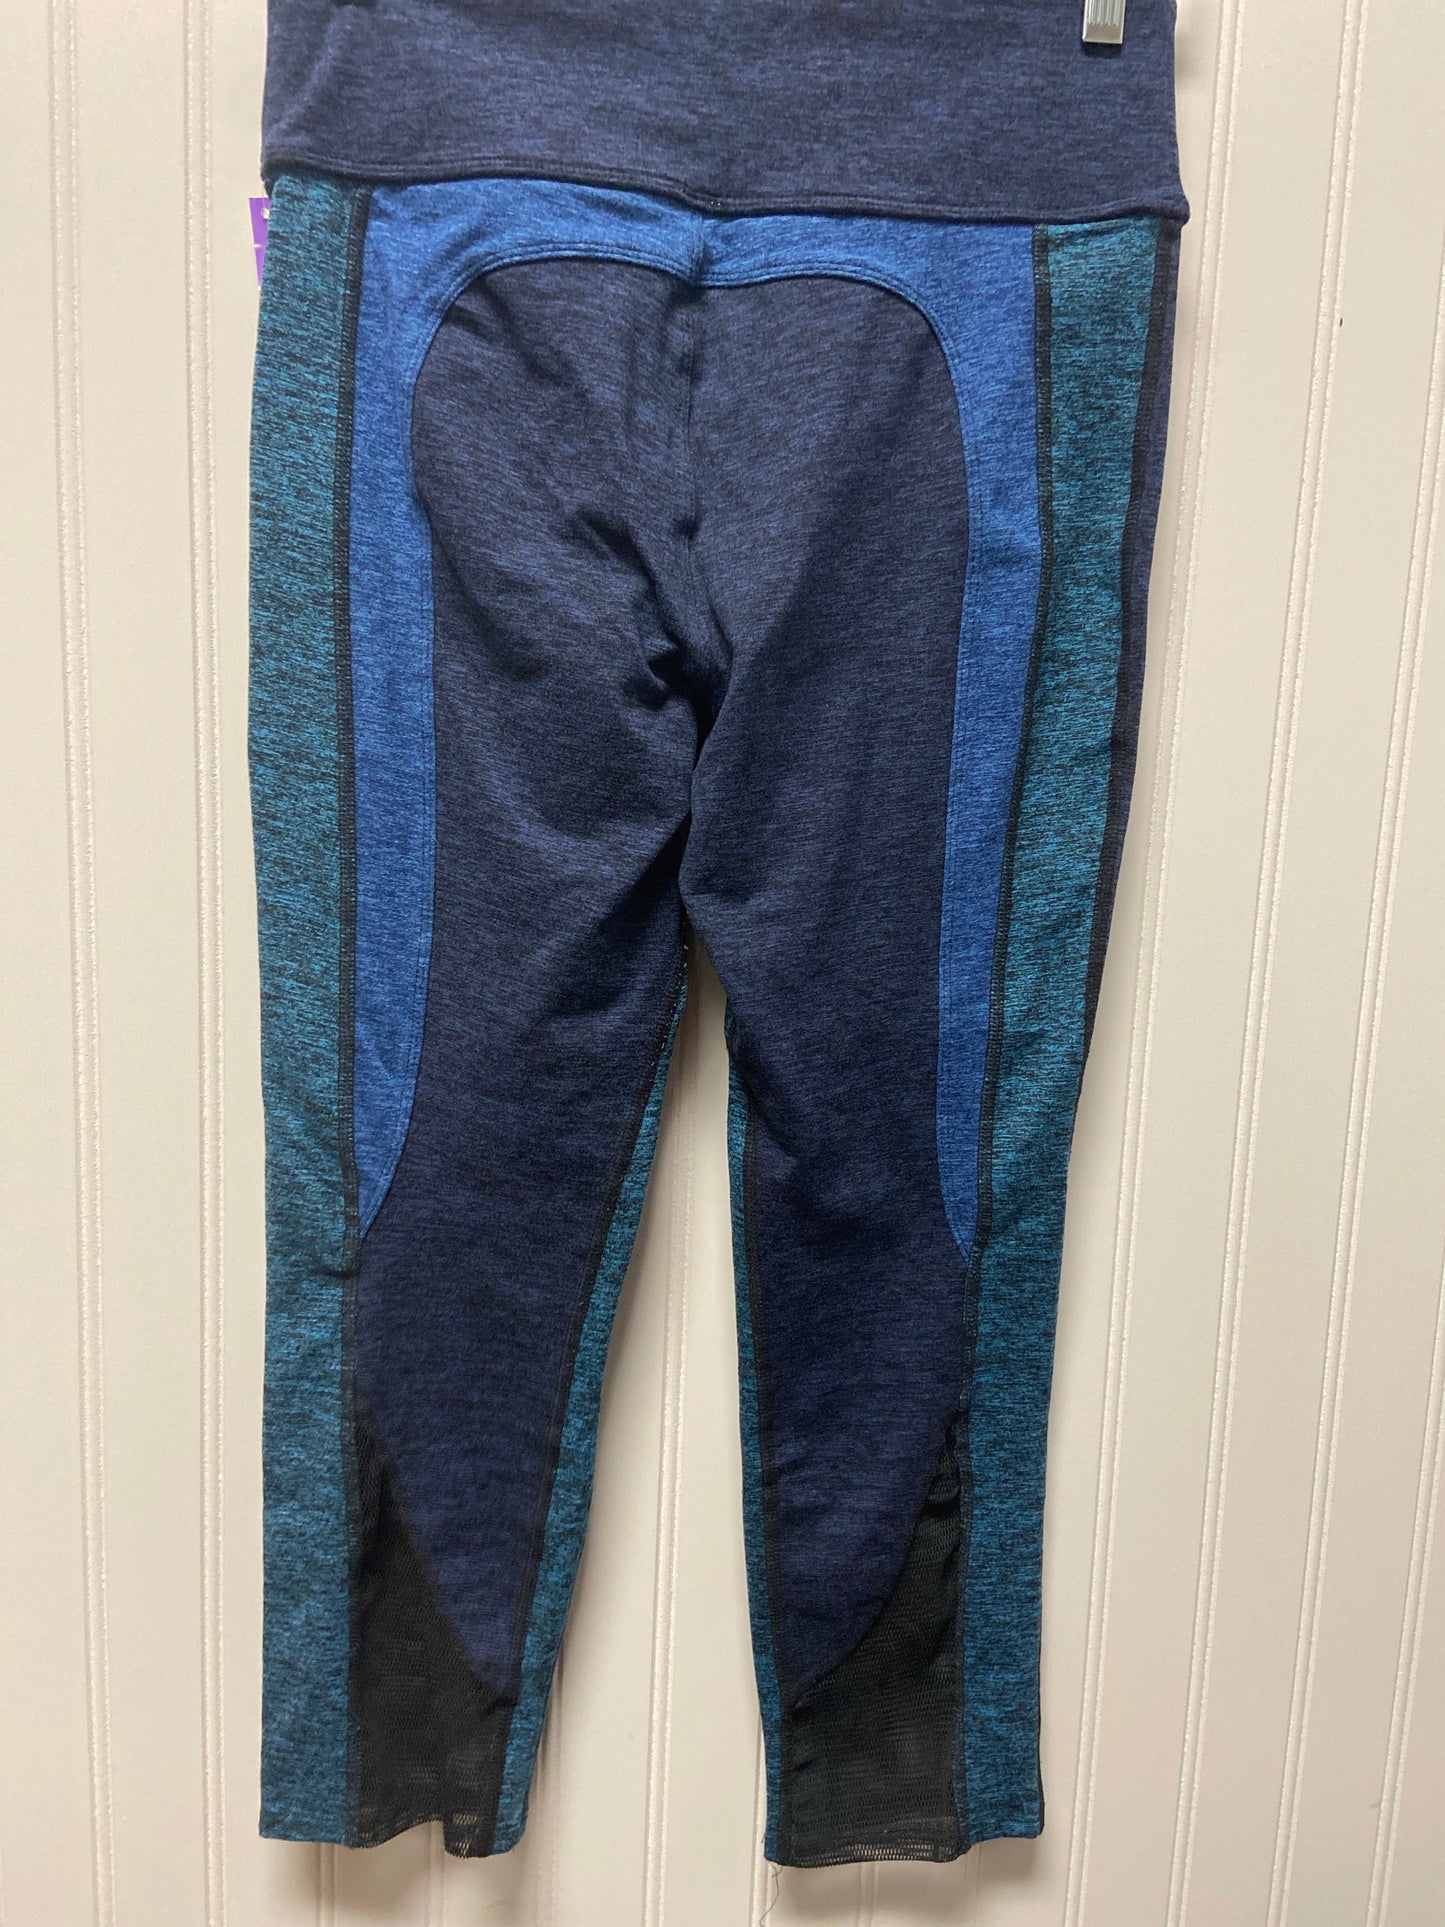 Blue Athletic Leggings Free People, Size S